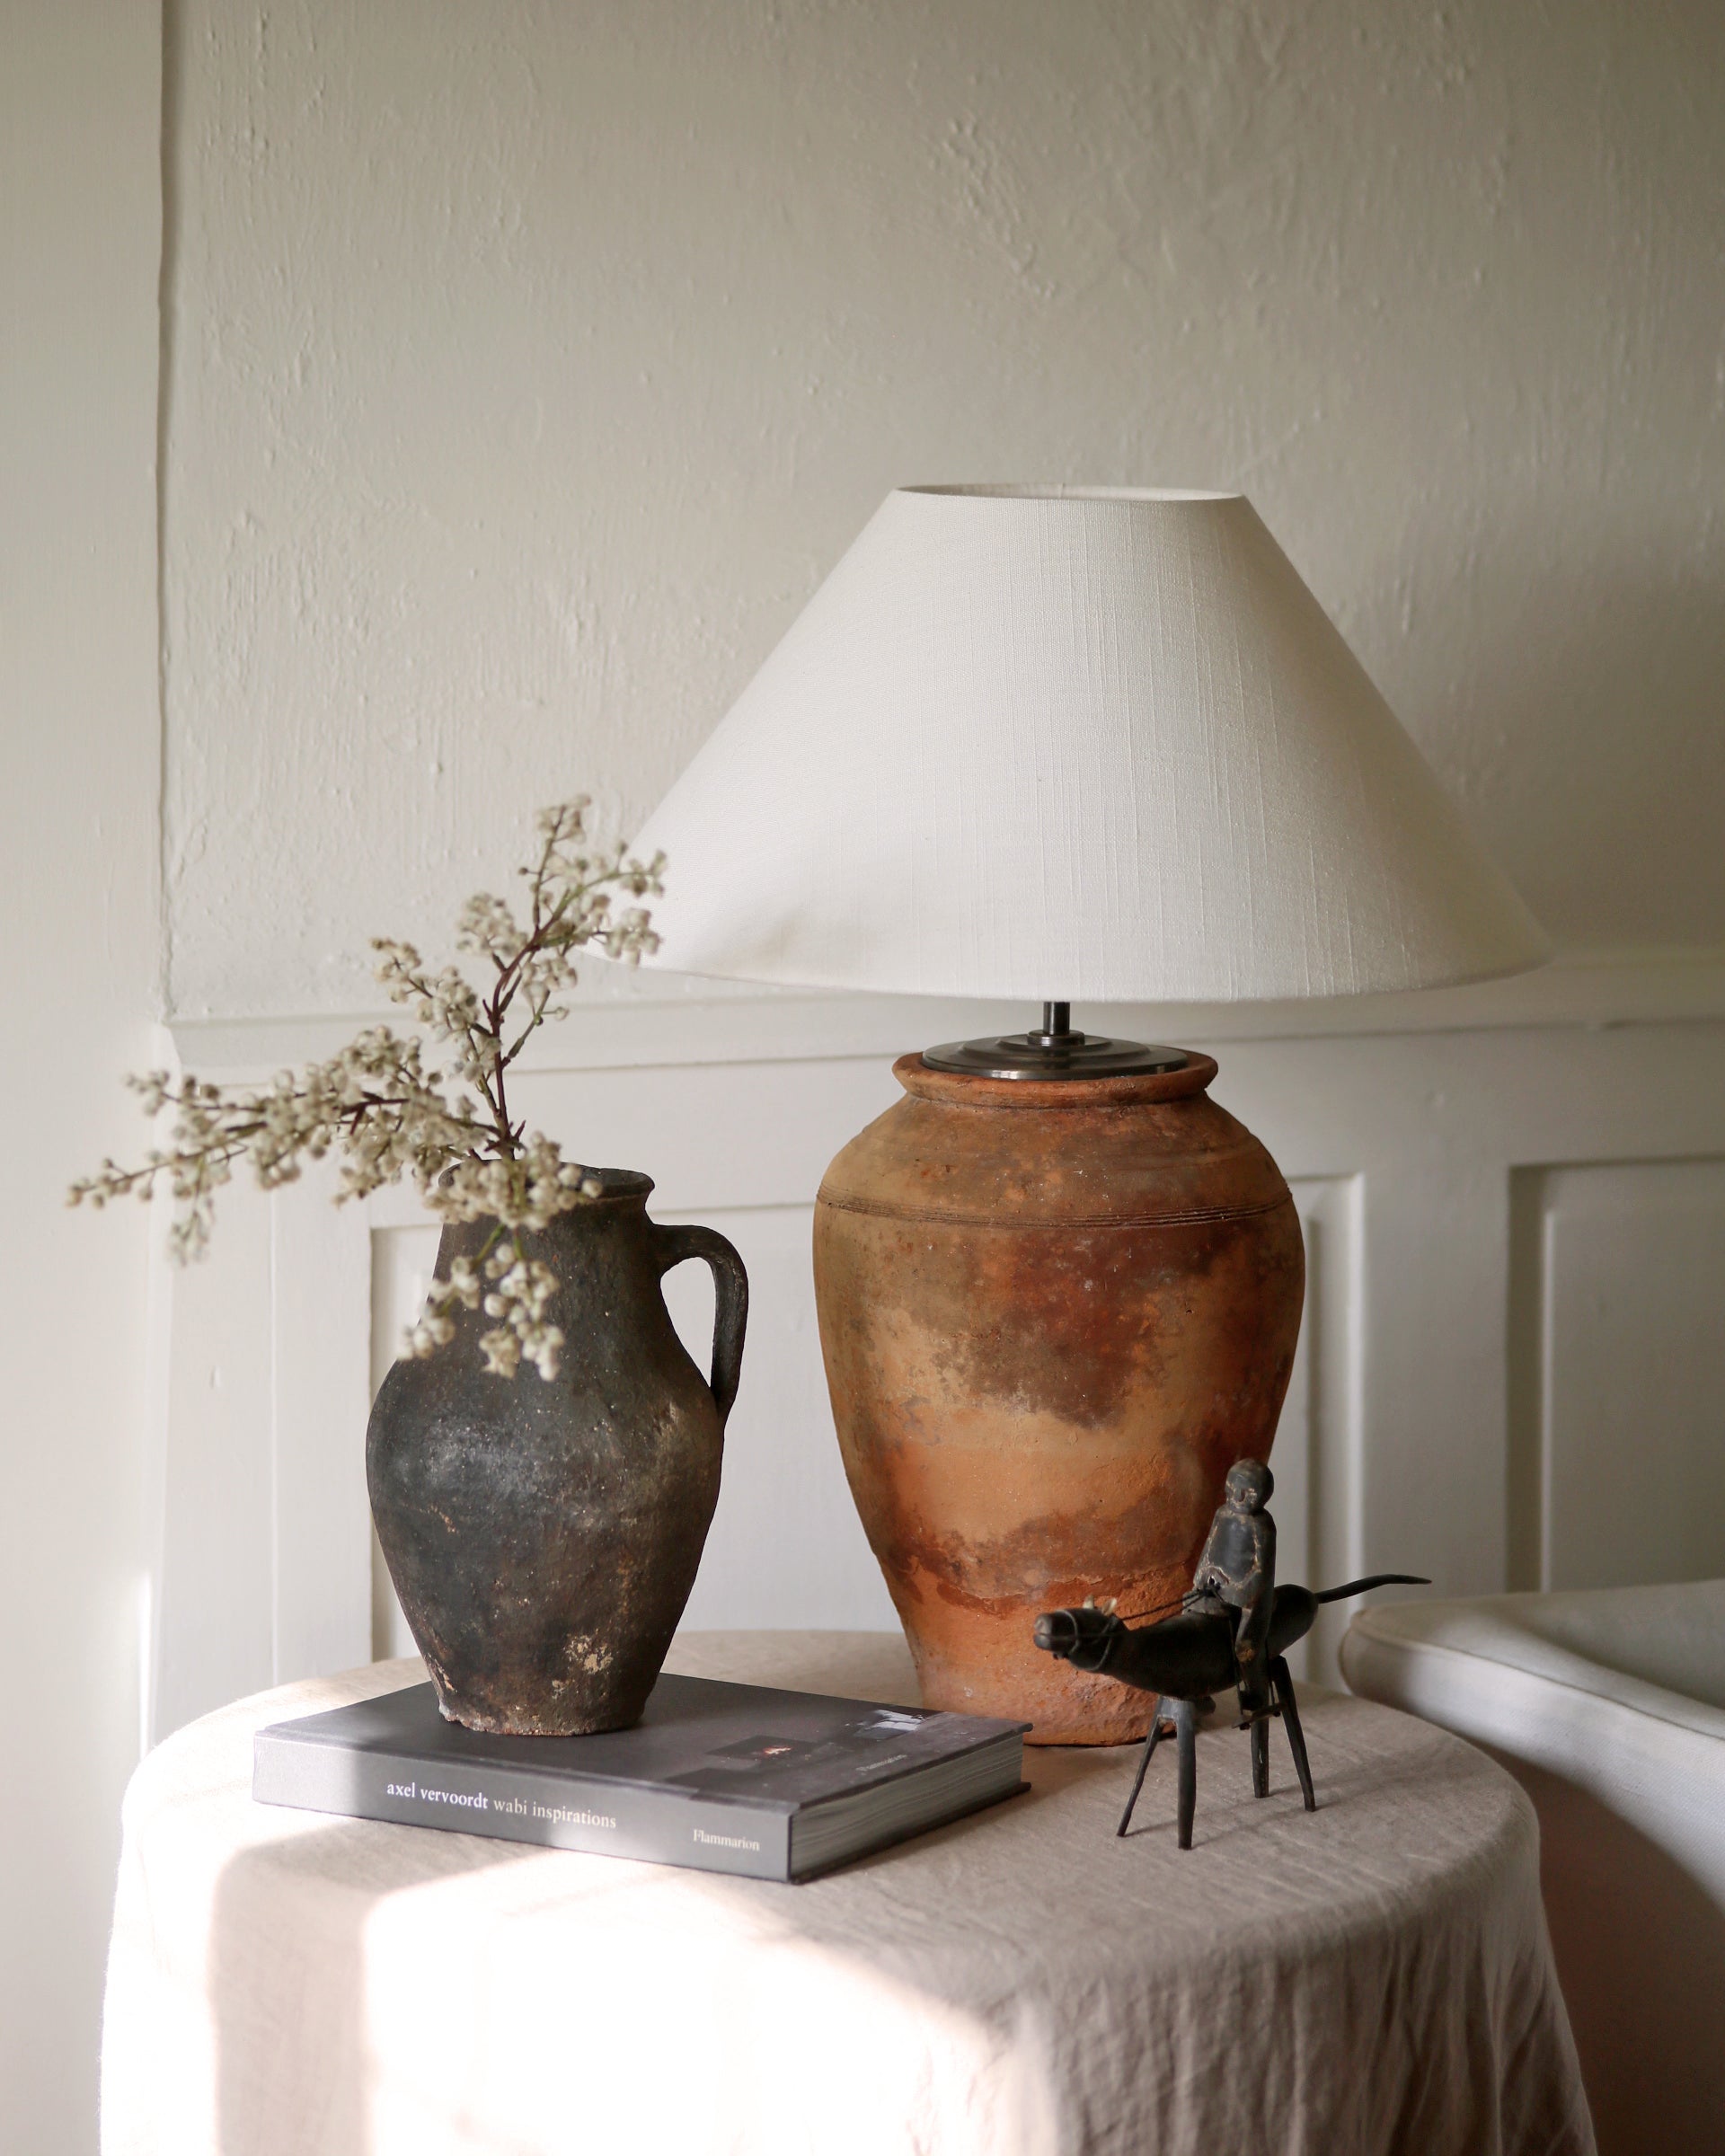 Antique terracotta clay table lamp styled with antique homewares